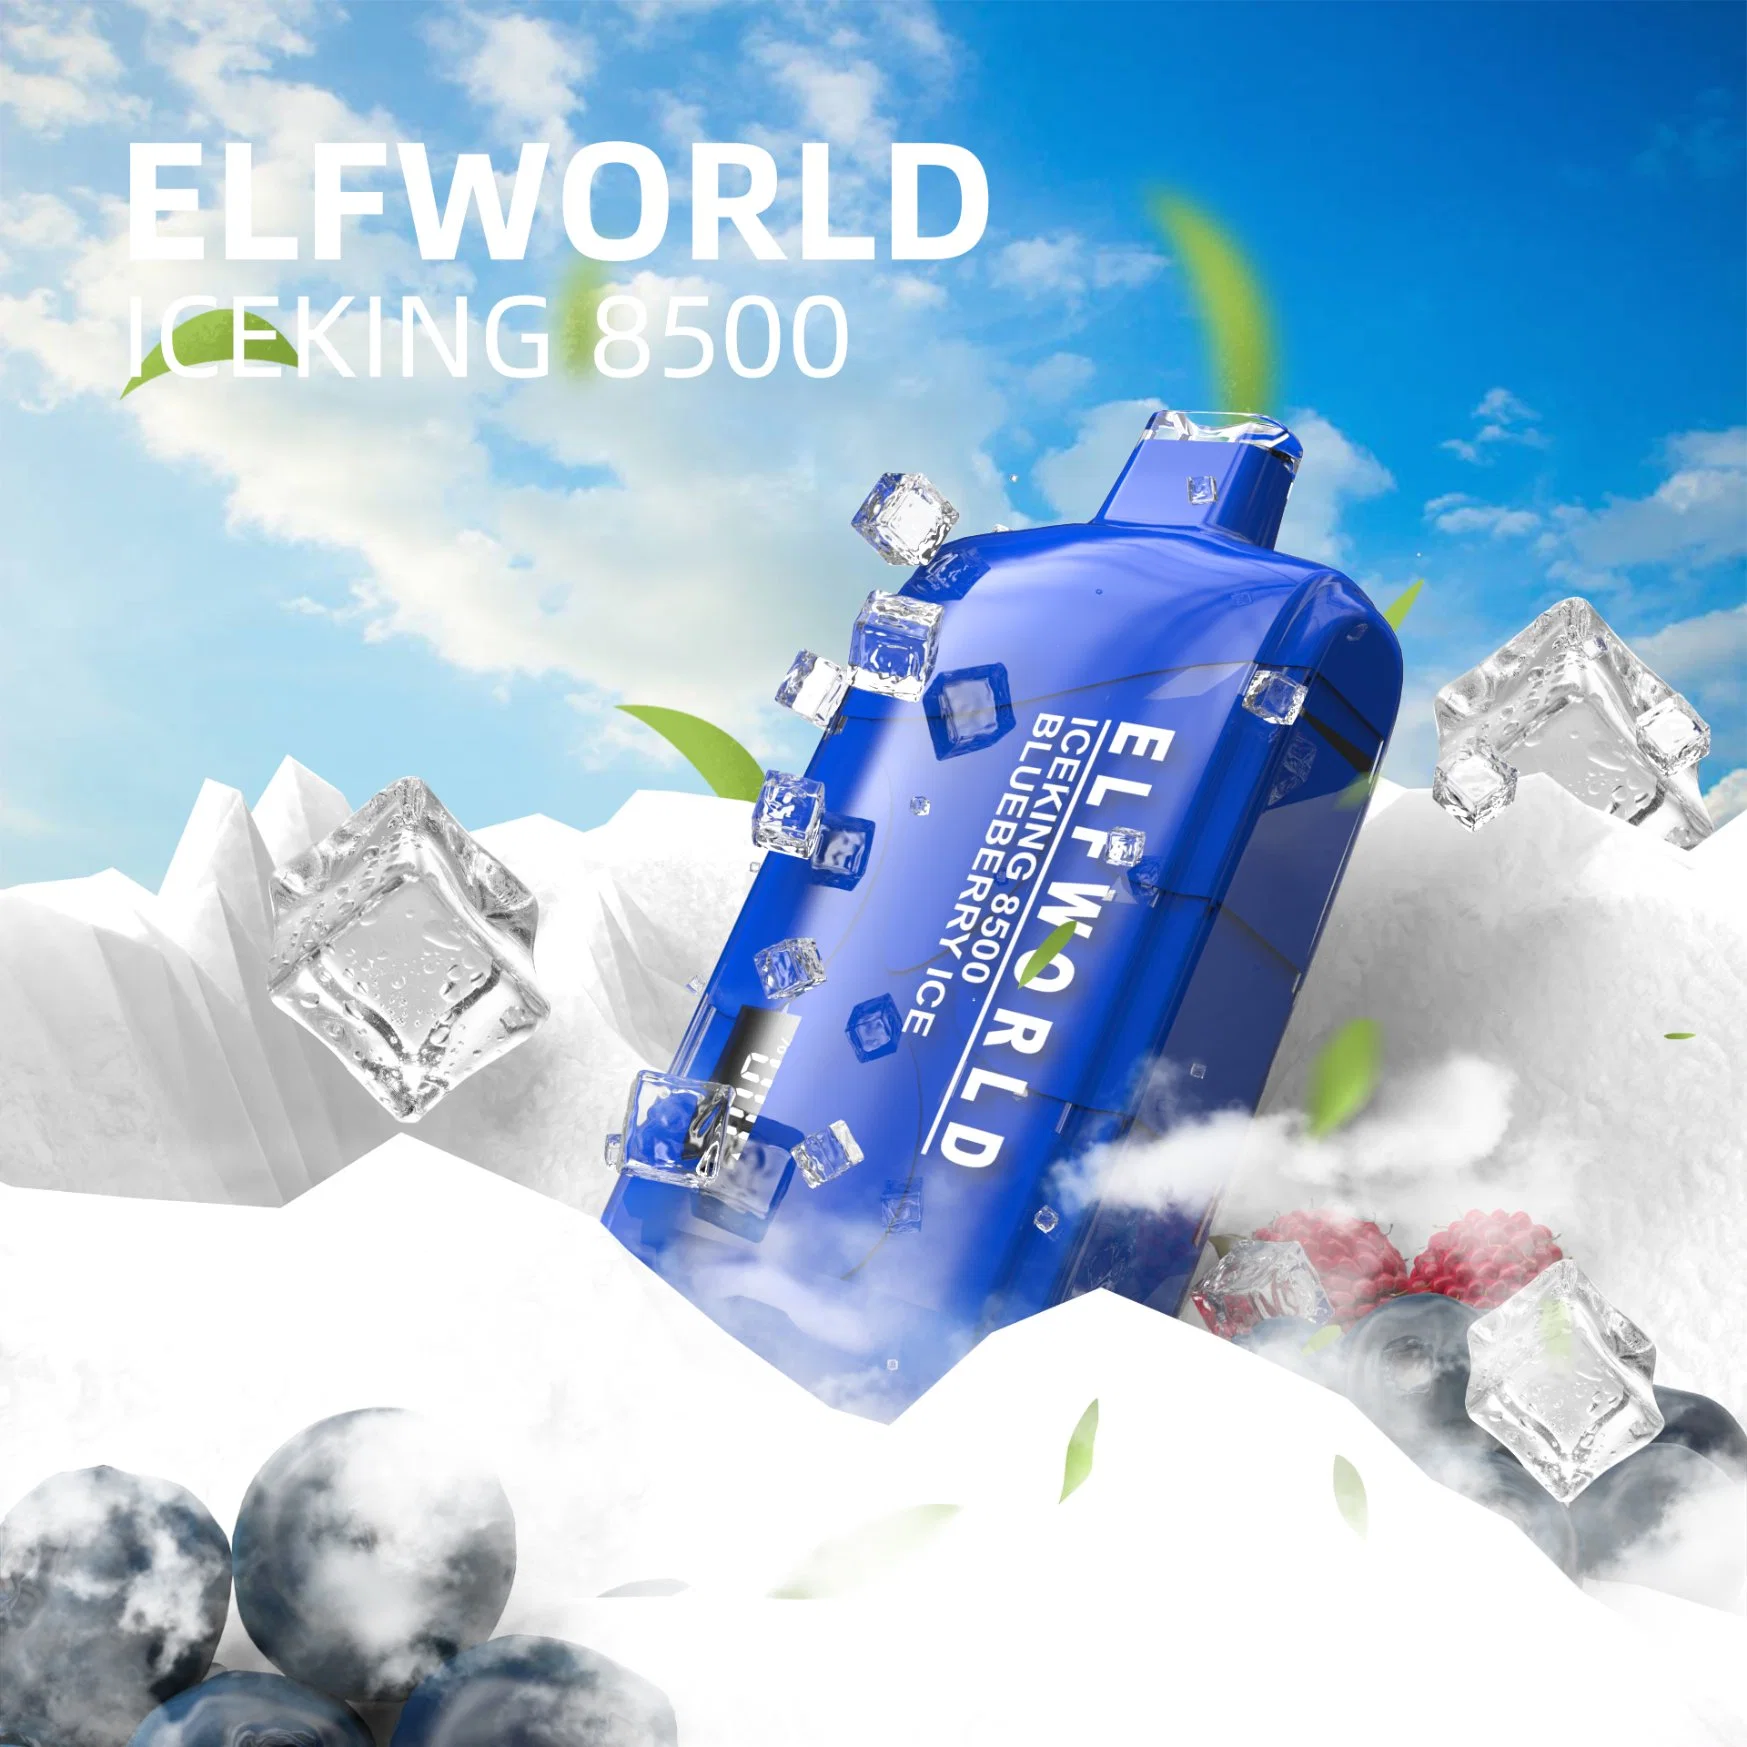 Newest Style Disposable E Cigarette Elfworld Ice King 8500 Puffs with Digital Screen Display Vape Atomizer